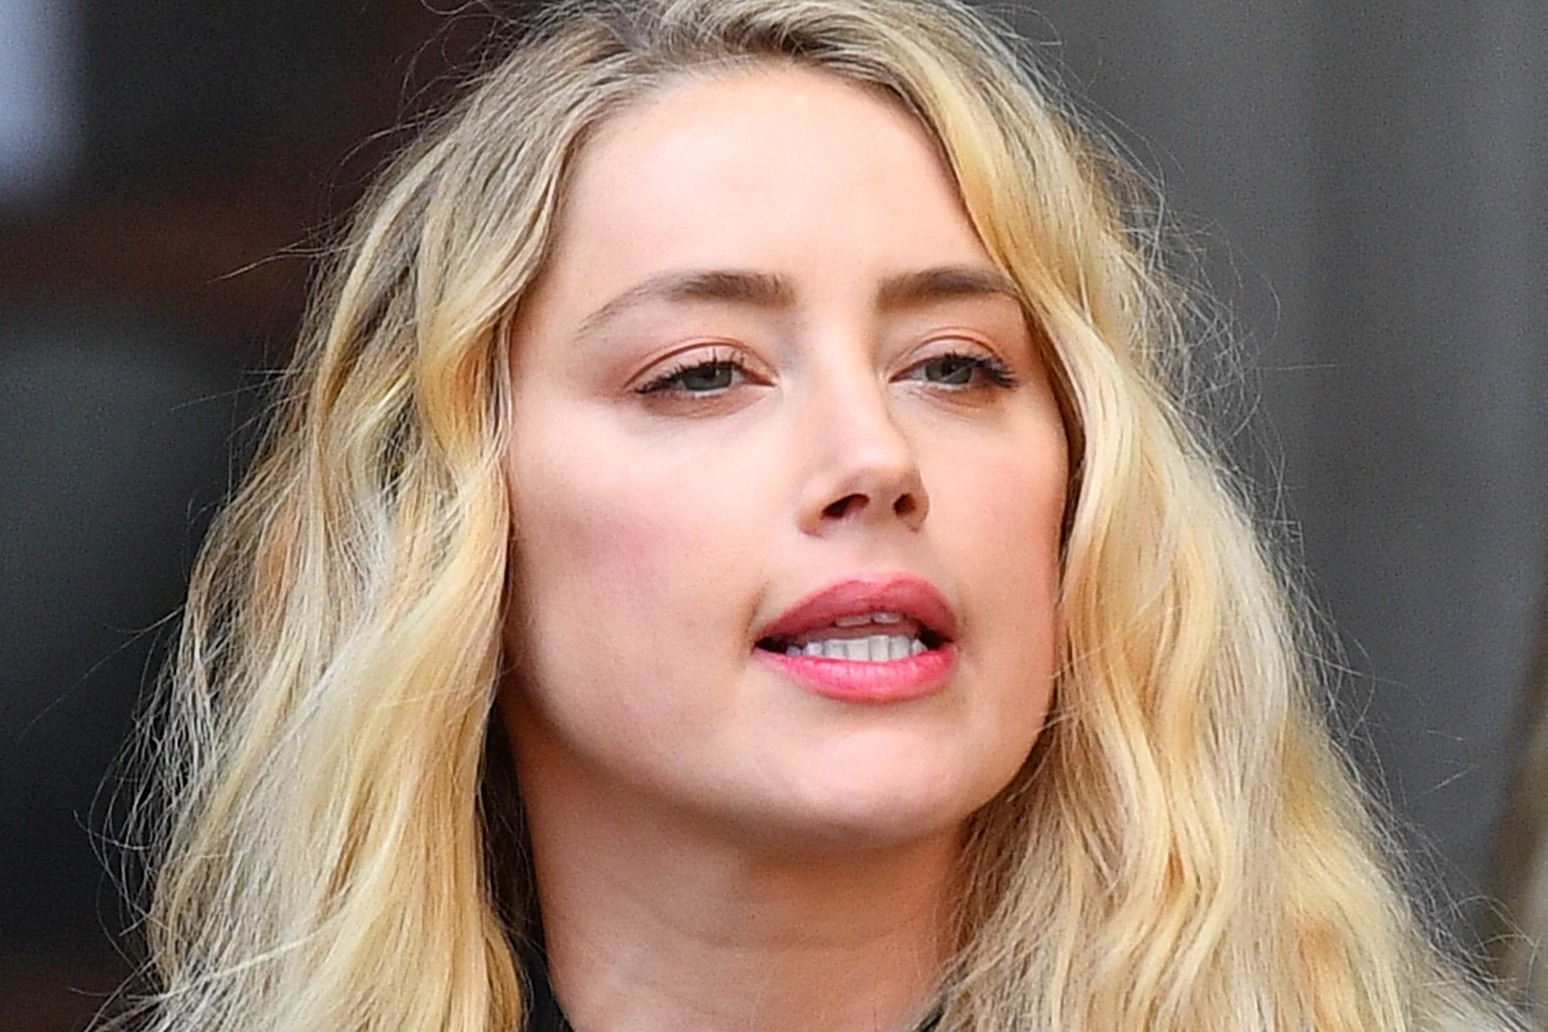 Amber Heard subjected to sexual violence by Johnny Depp, says psychologist 